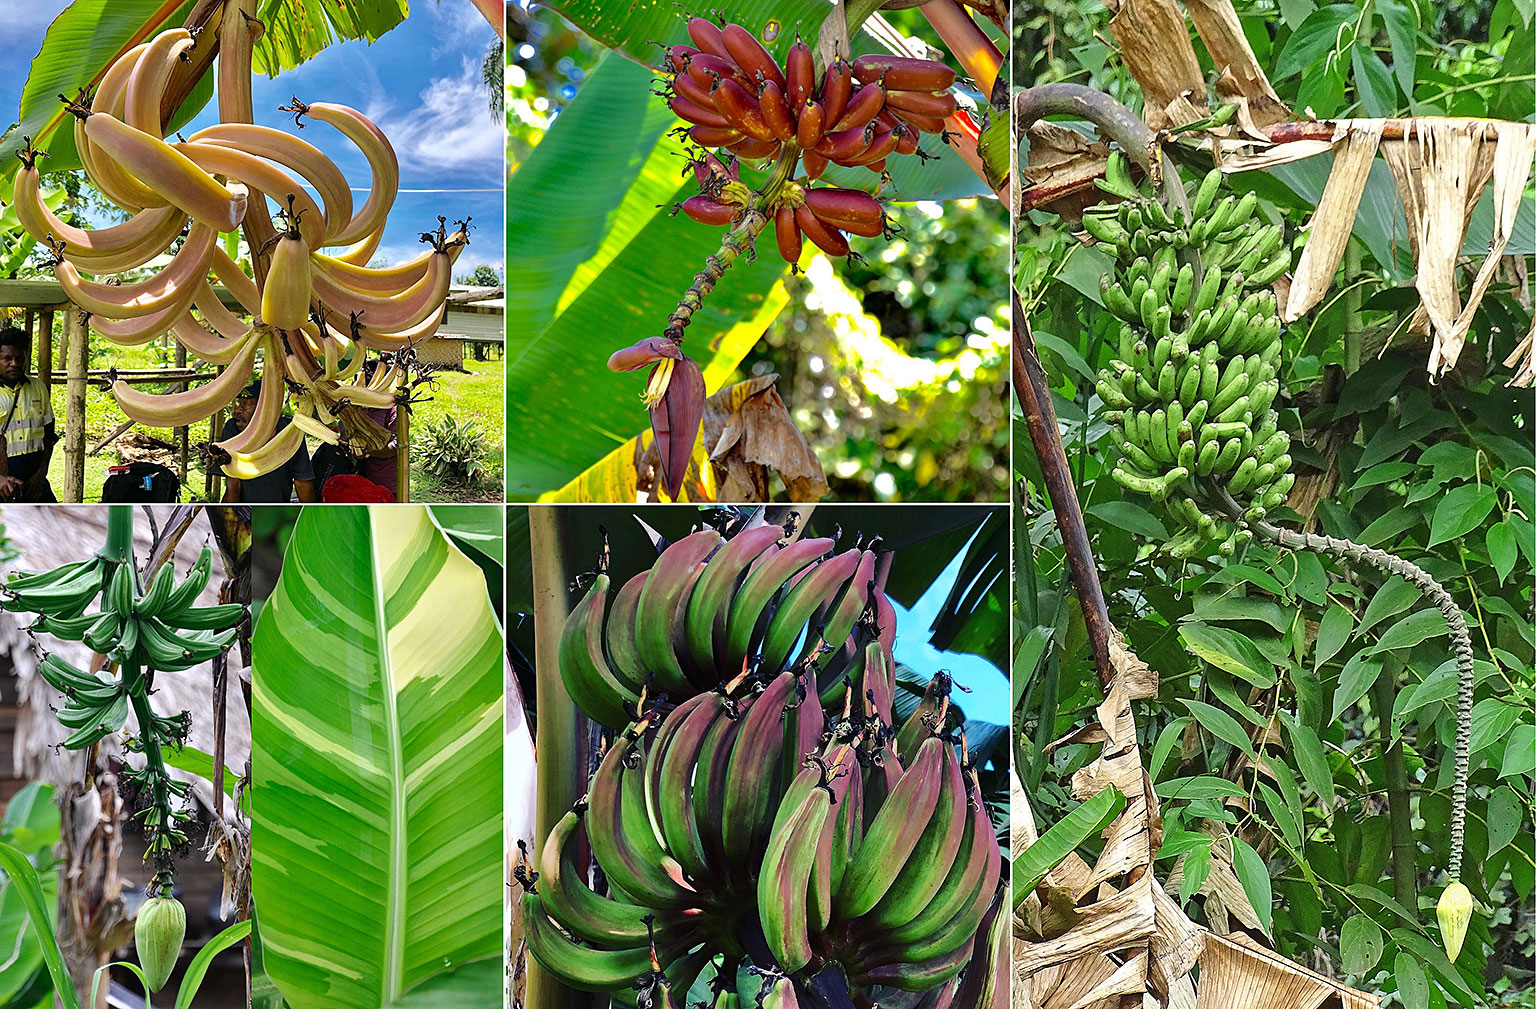 Where banana diversity defies expectations : News and analysis ...